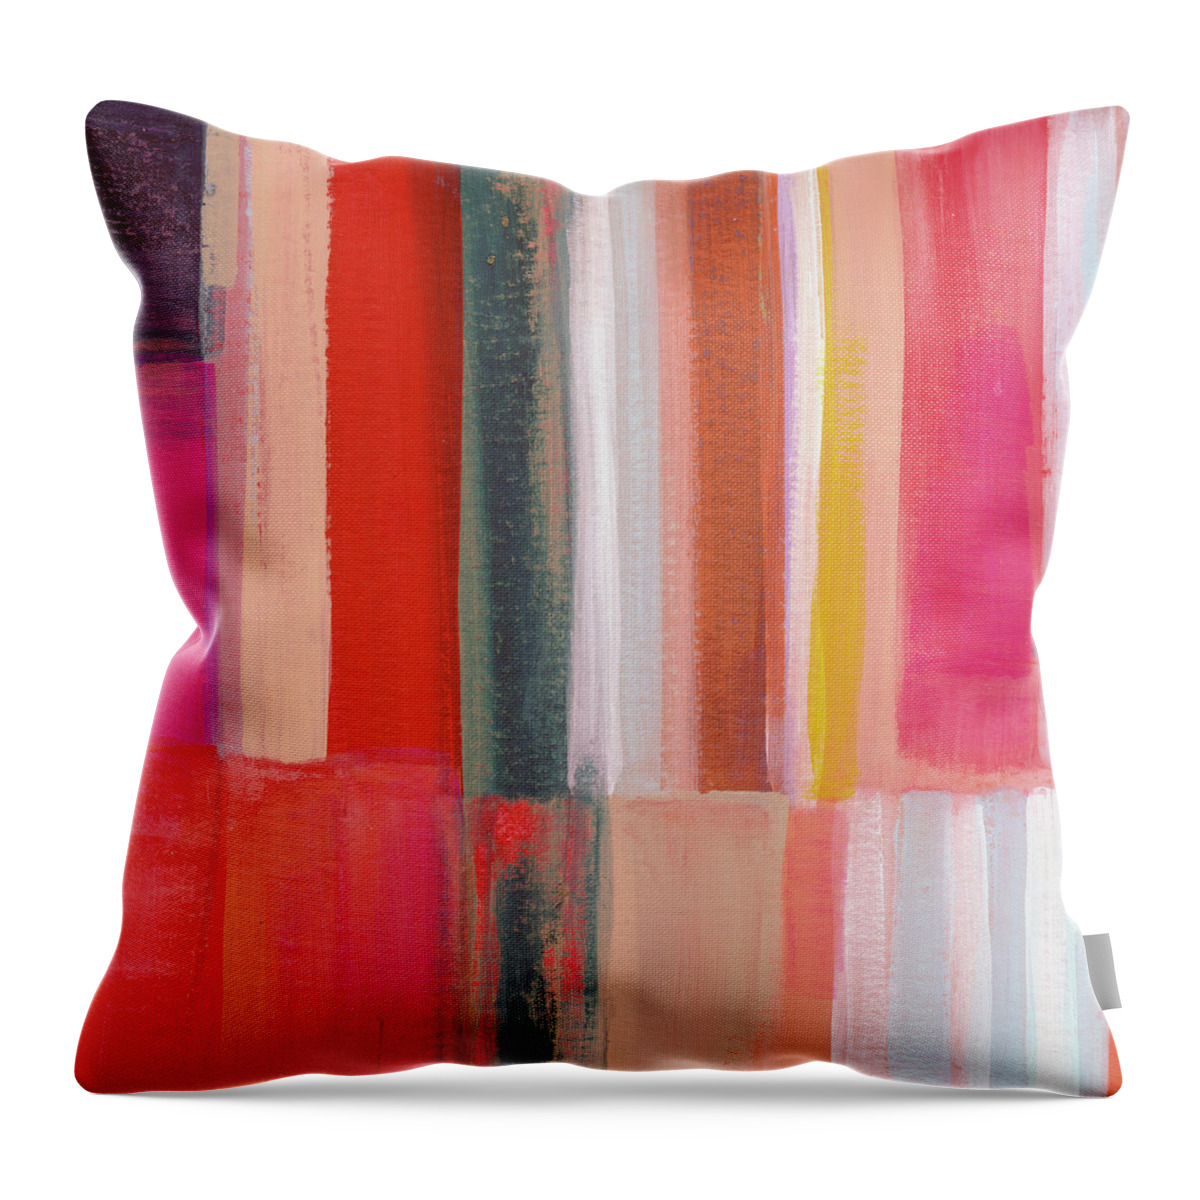 Abstract Modern Scandi Stripes Lines Square Large Colorful Colourful Pink Red Blue White Orange Texture Home Decorairbnb Decorliving Room Artbedroom Artloft Art Corporate Artset Designgallery Wallart By Linda Woodsart For Interior Designersgreeting Cardpillowtotehospitality Arthotel Artart Licensing Throw Pillow featuring the painting Stroget 1- Art by Linda Woods by Linda Woods